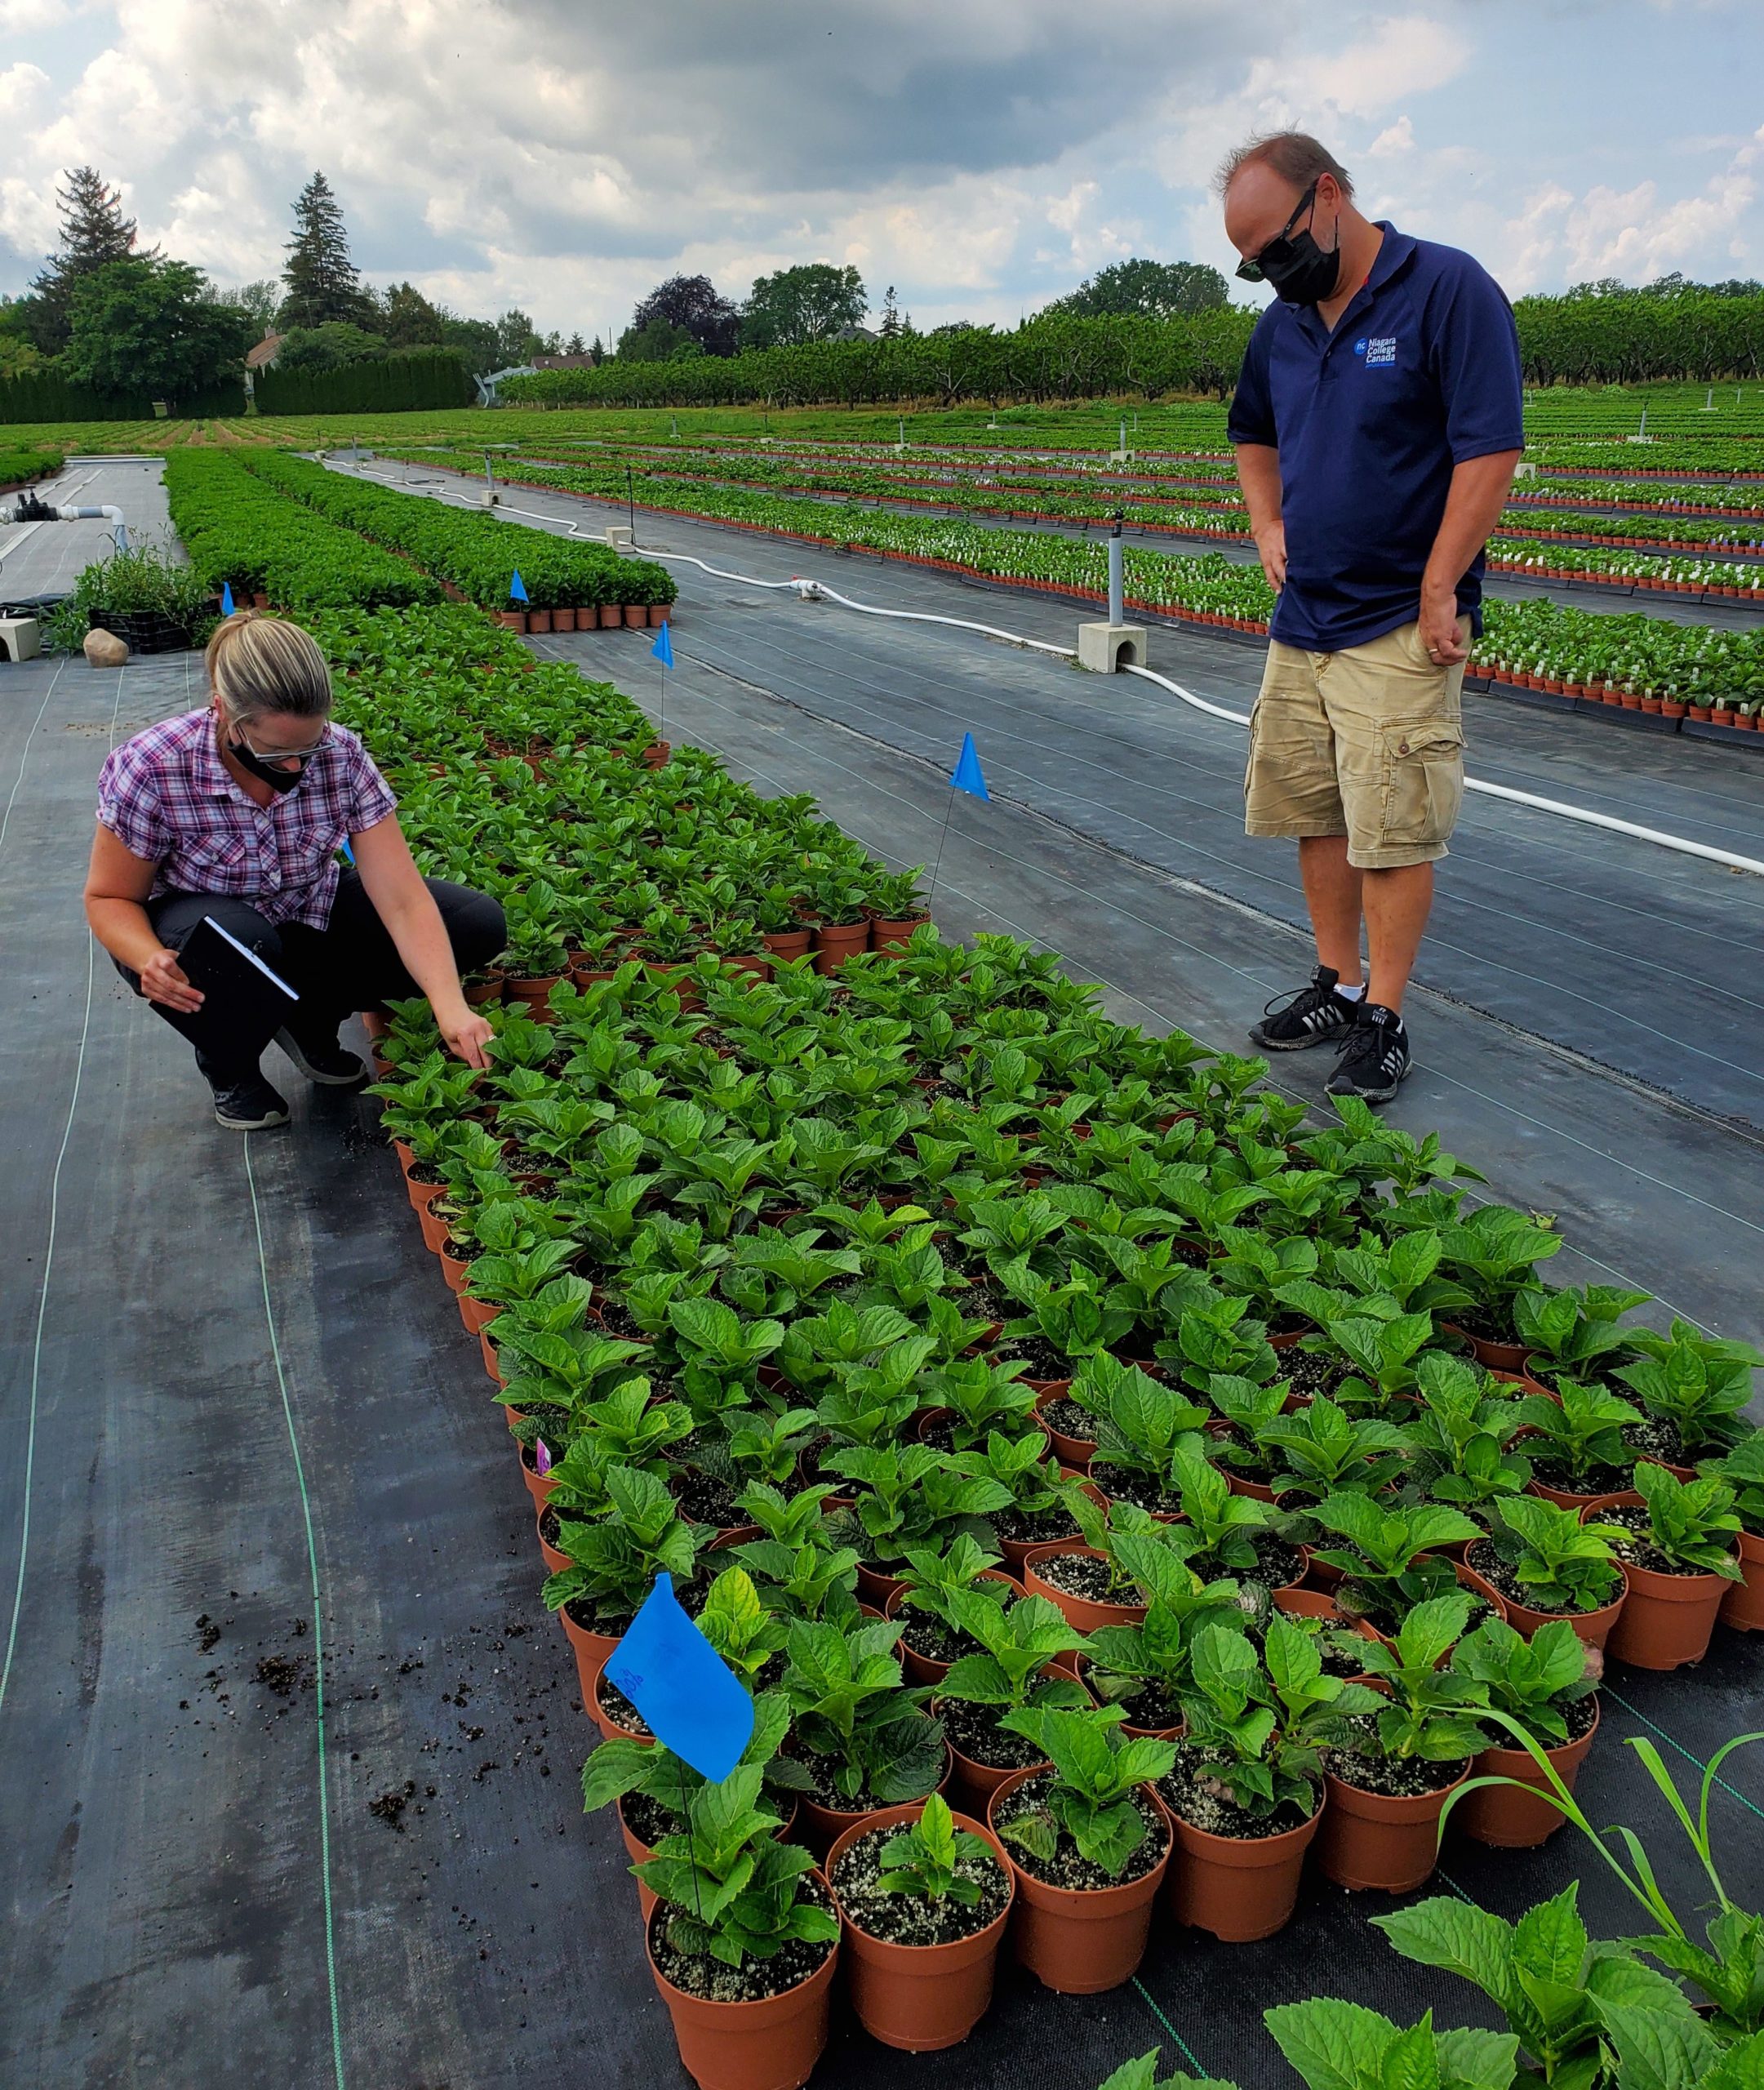 Researchers Christine George and Derek Schulze with AETIC are shown evaluating the performance of hydrangeas at Kamps Hydrangea farm in Vineland. These blue-flagged hydrangeas have been amended with varying levels of zeolite as part of a trial with International Zeolite Corp. currently in progress.